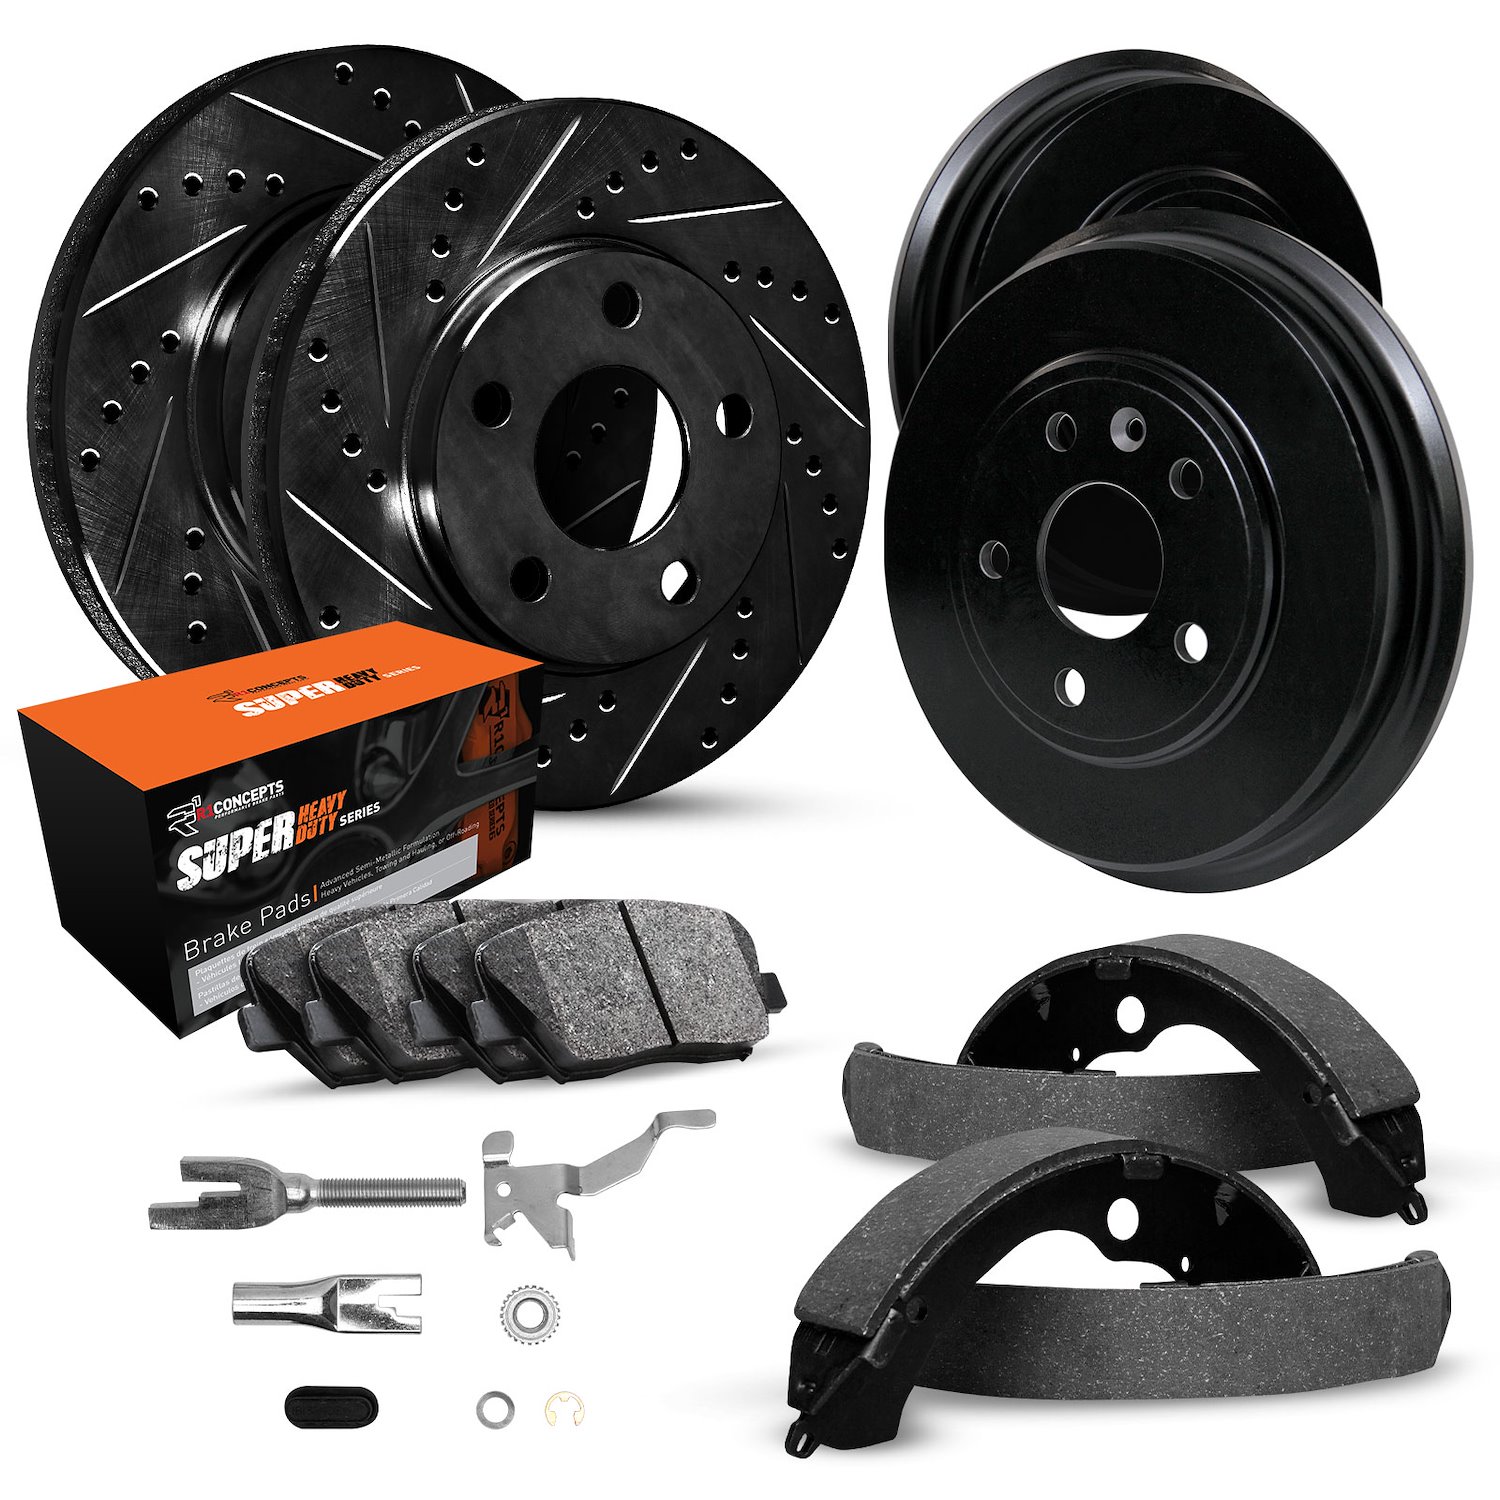 E-Line Drilled & Slotted Black Brake Rotor & Drum Set w/Super-Duty Pads, Shoes, & Adjusters, 1977-1991 GM